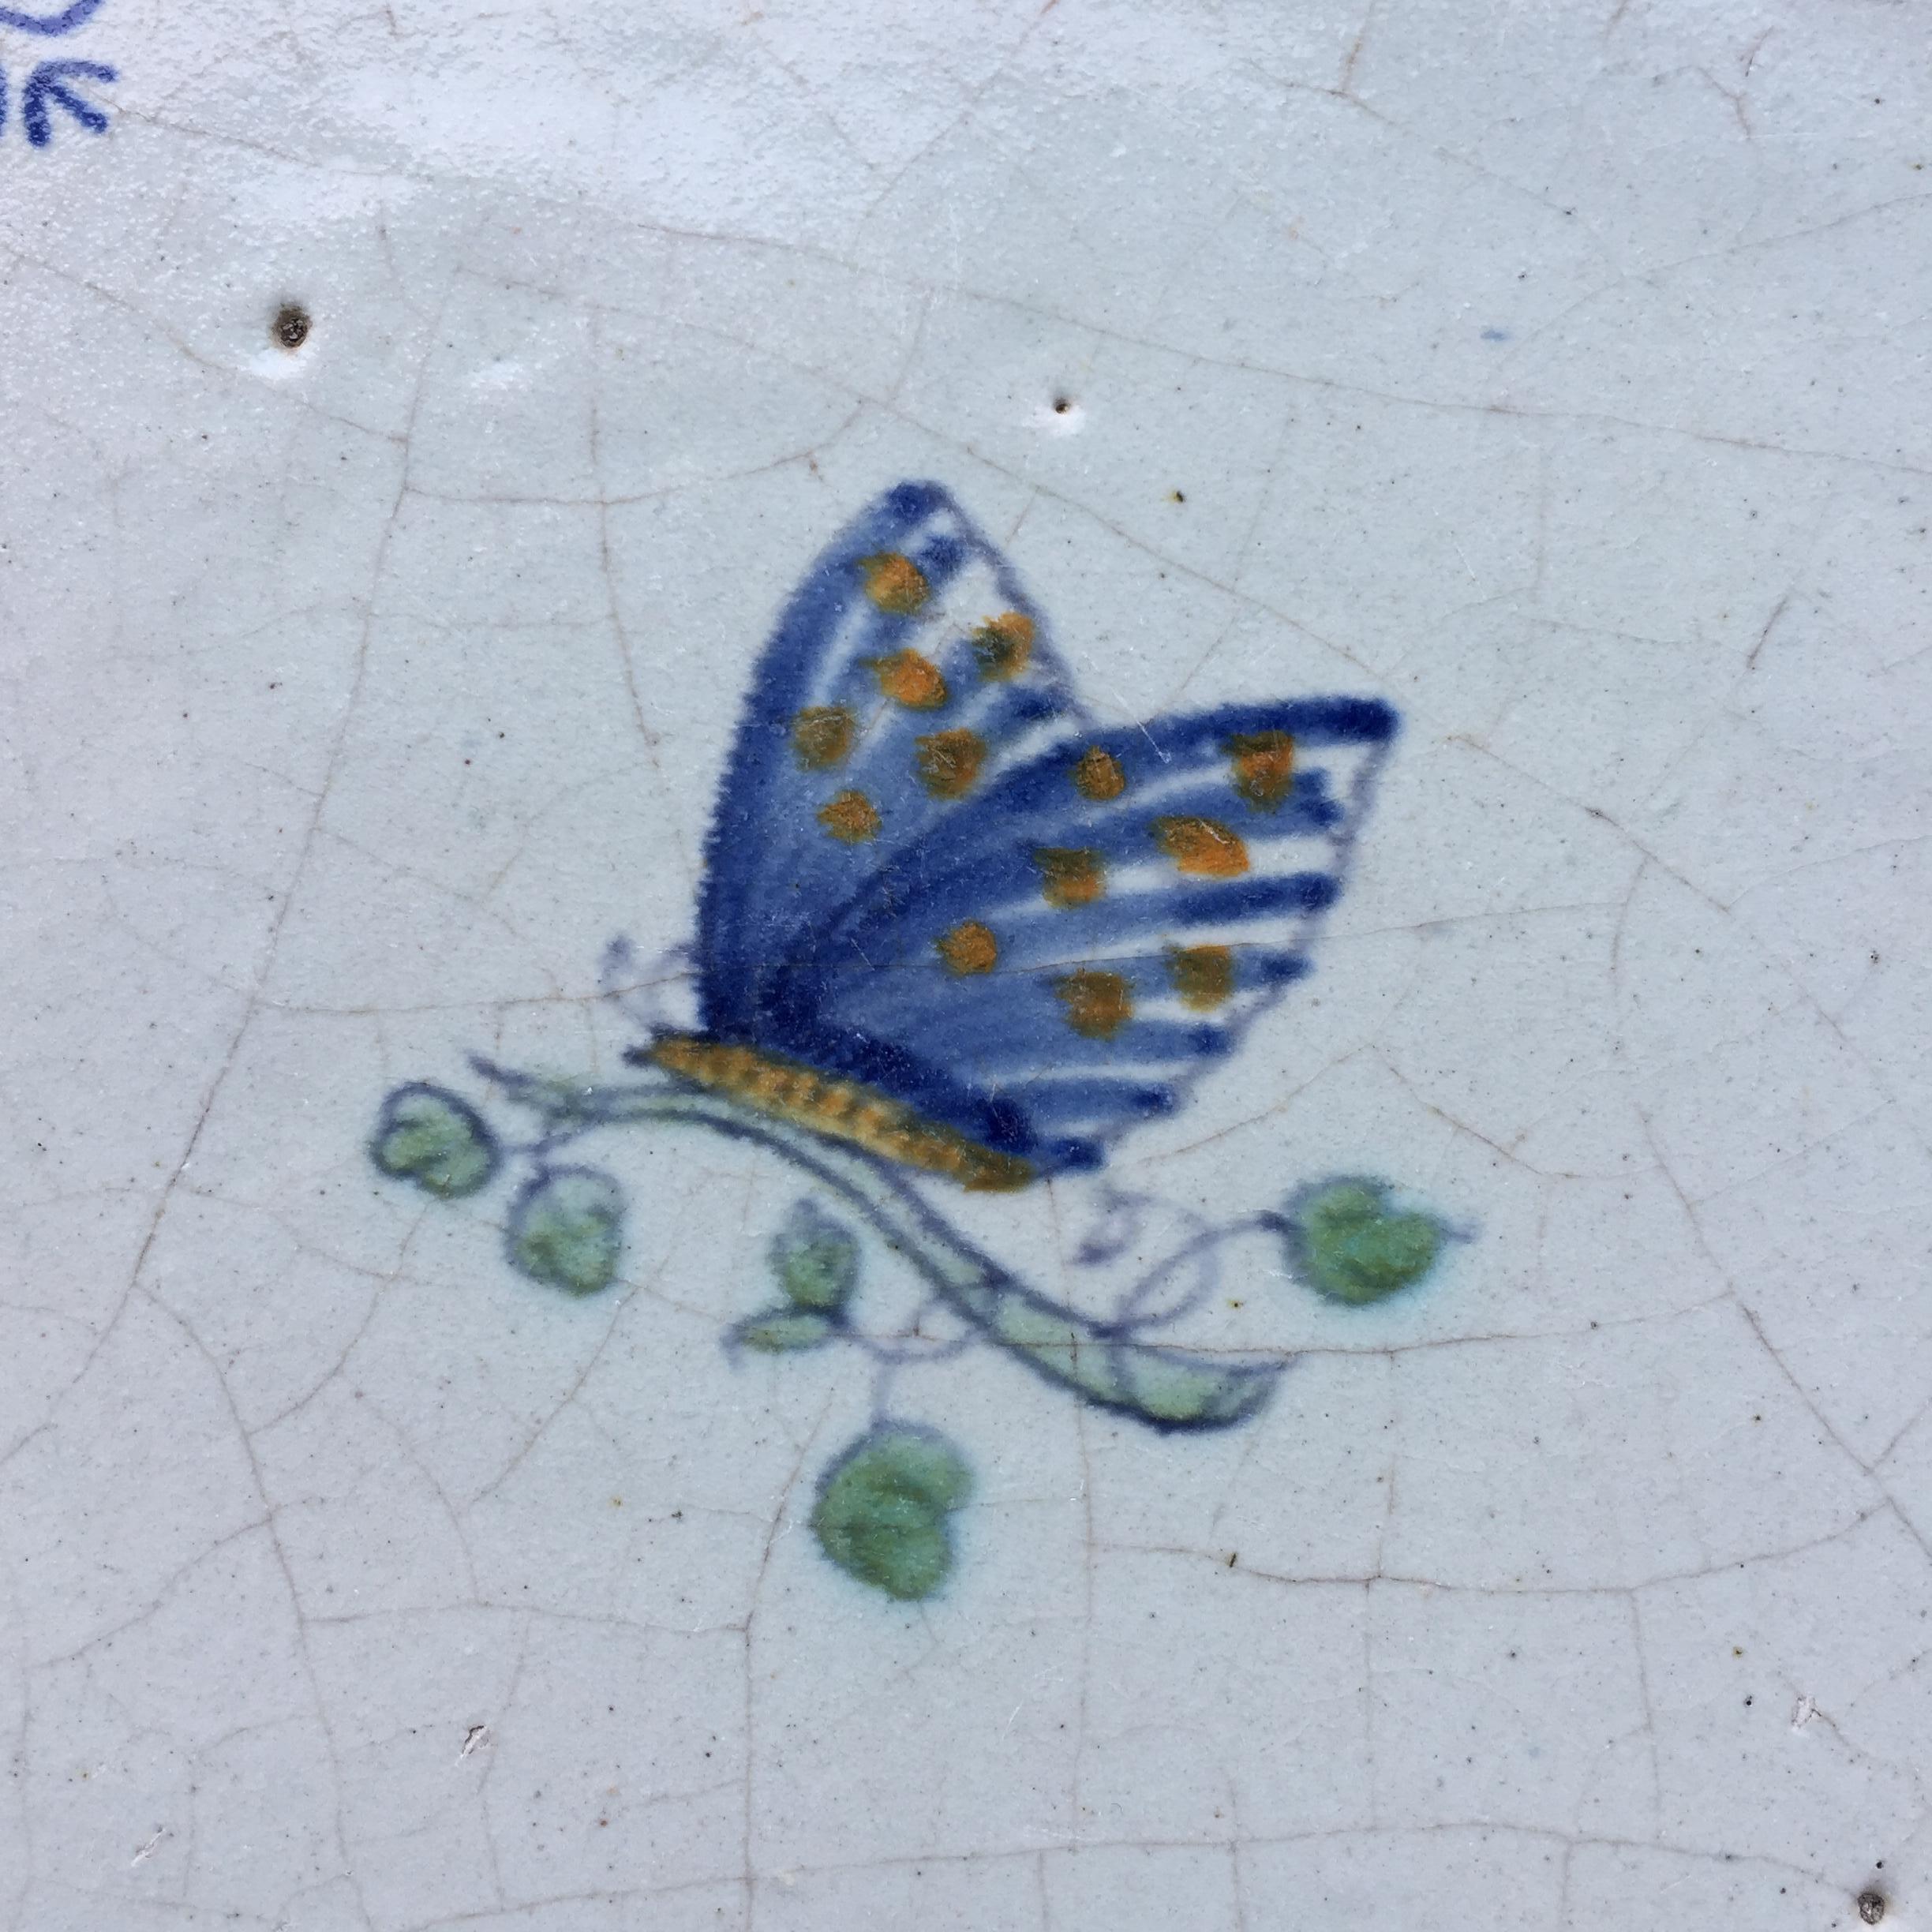 Baroque Blue and White Dutch Delft Tile with Butterfly, Mid 17th Century